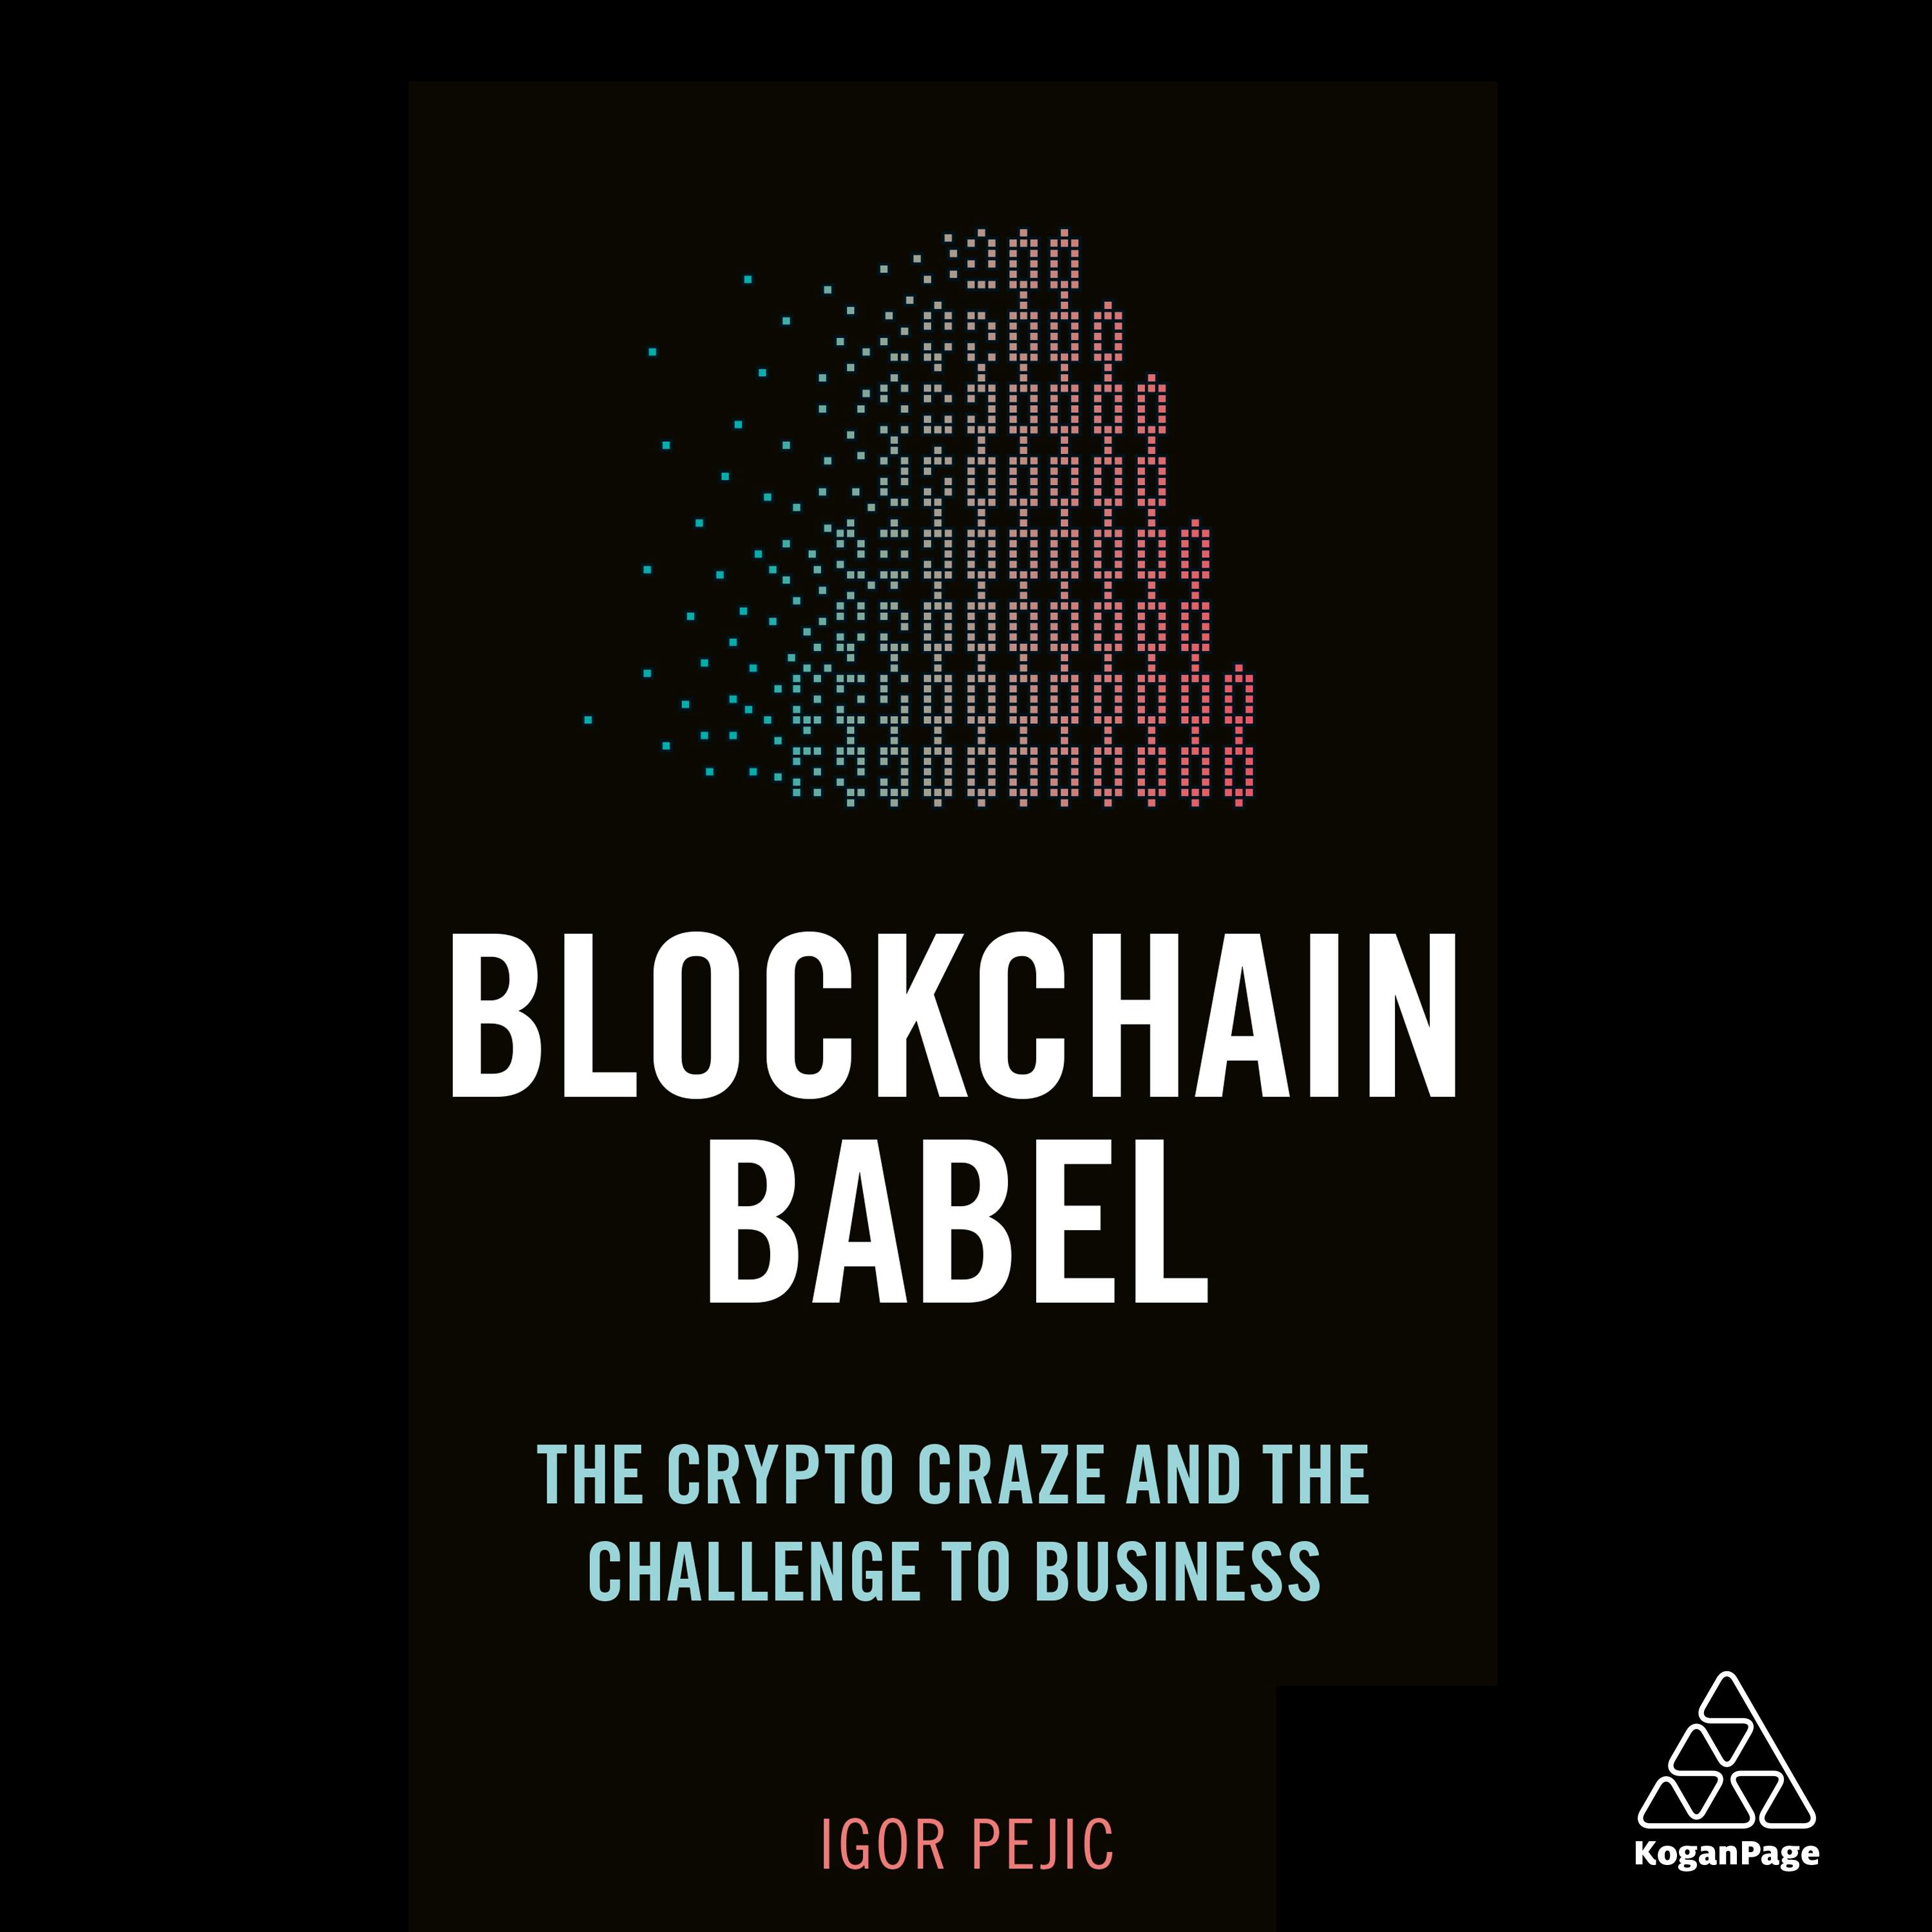 Blockchain Babel: The Crypto Craze and the Challenge to Business - Igor Pejic